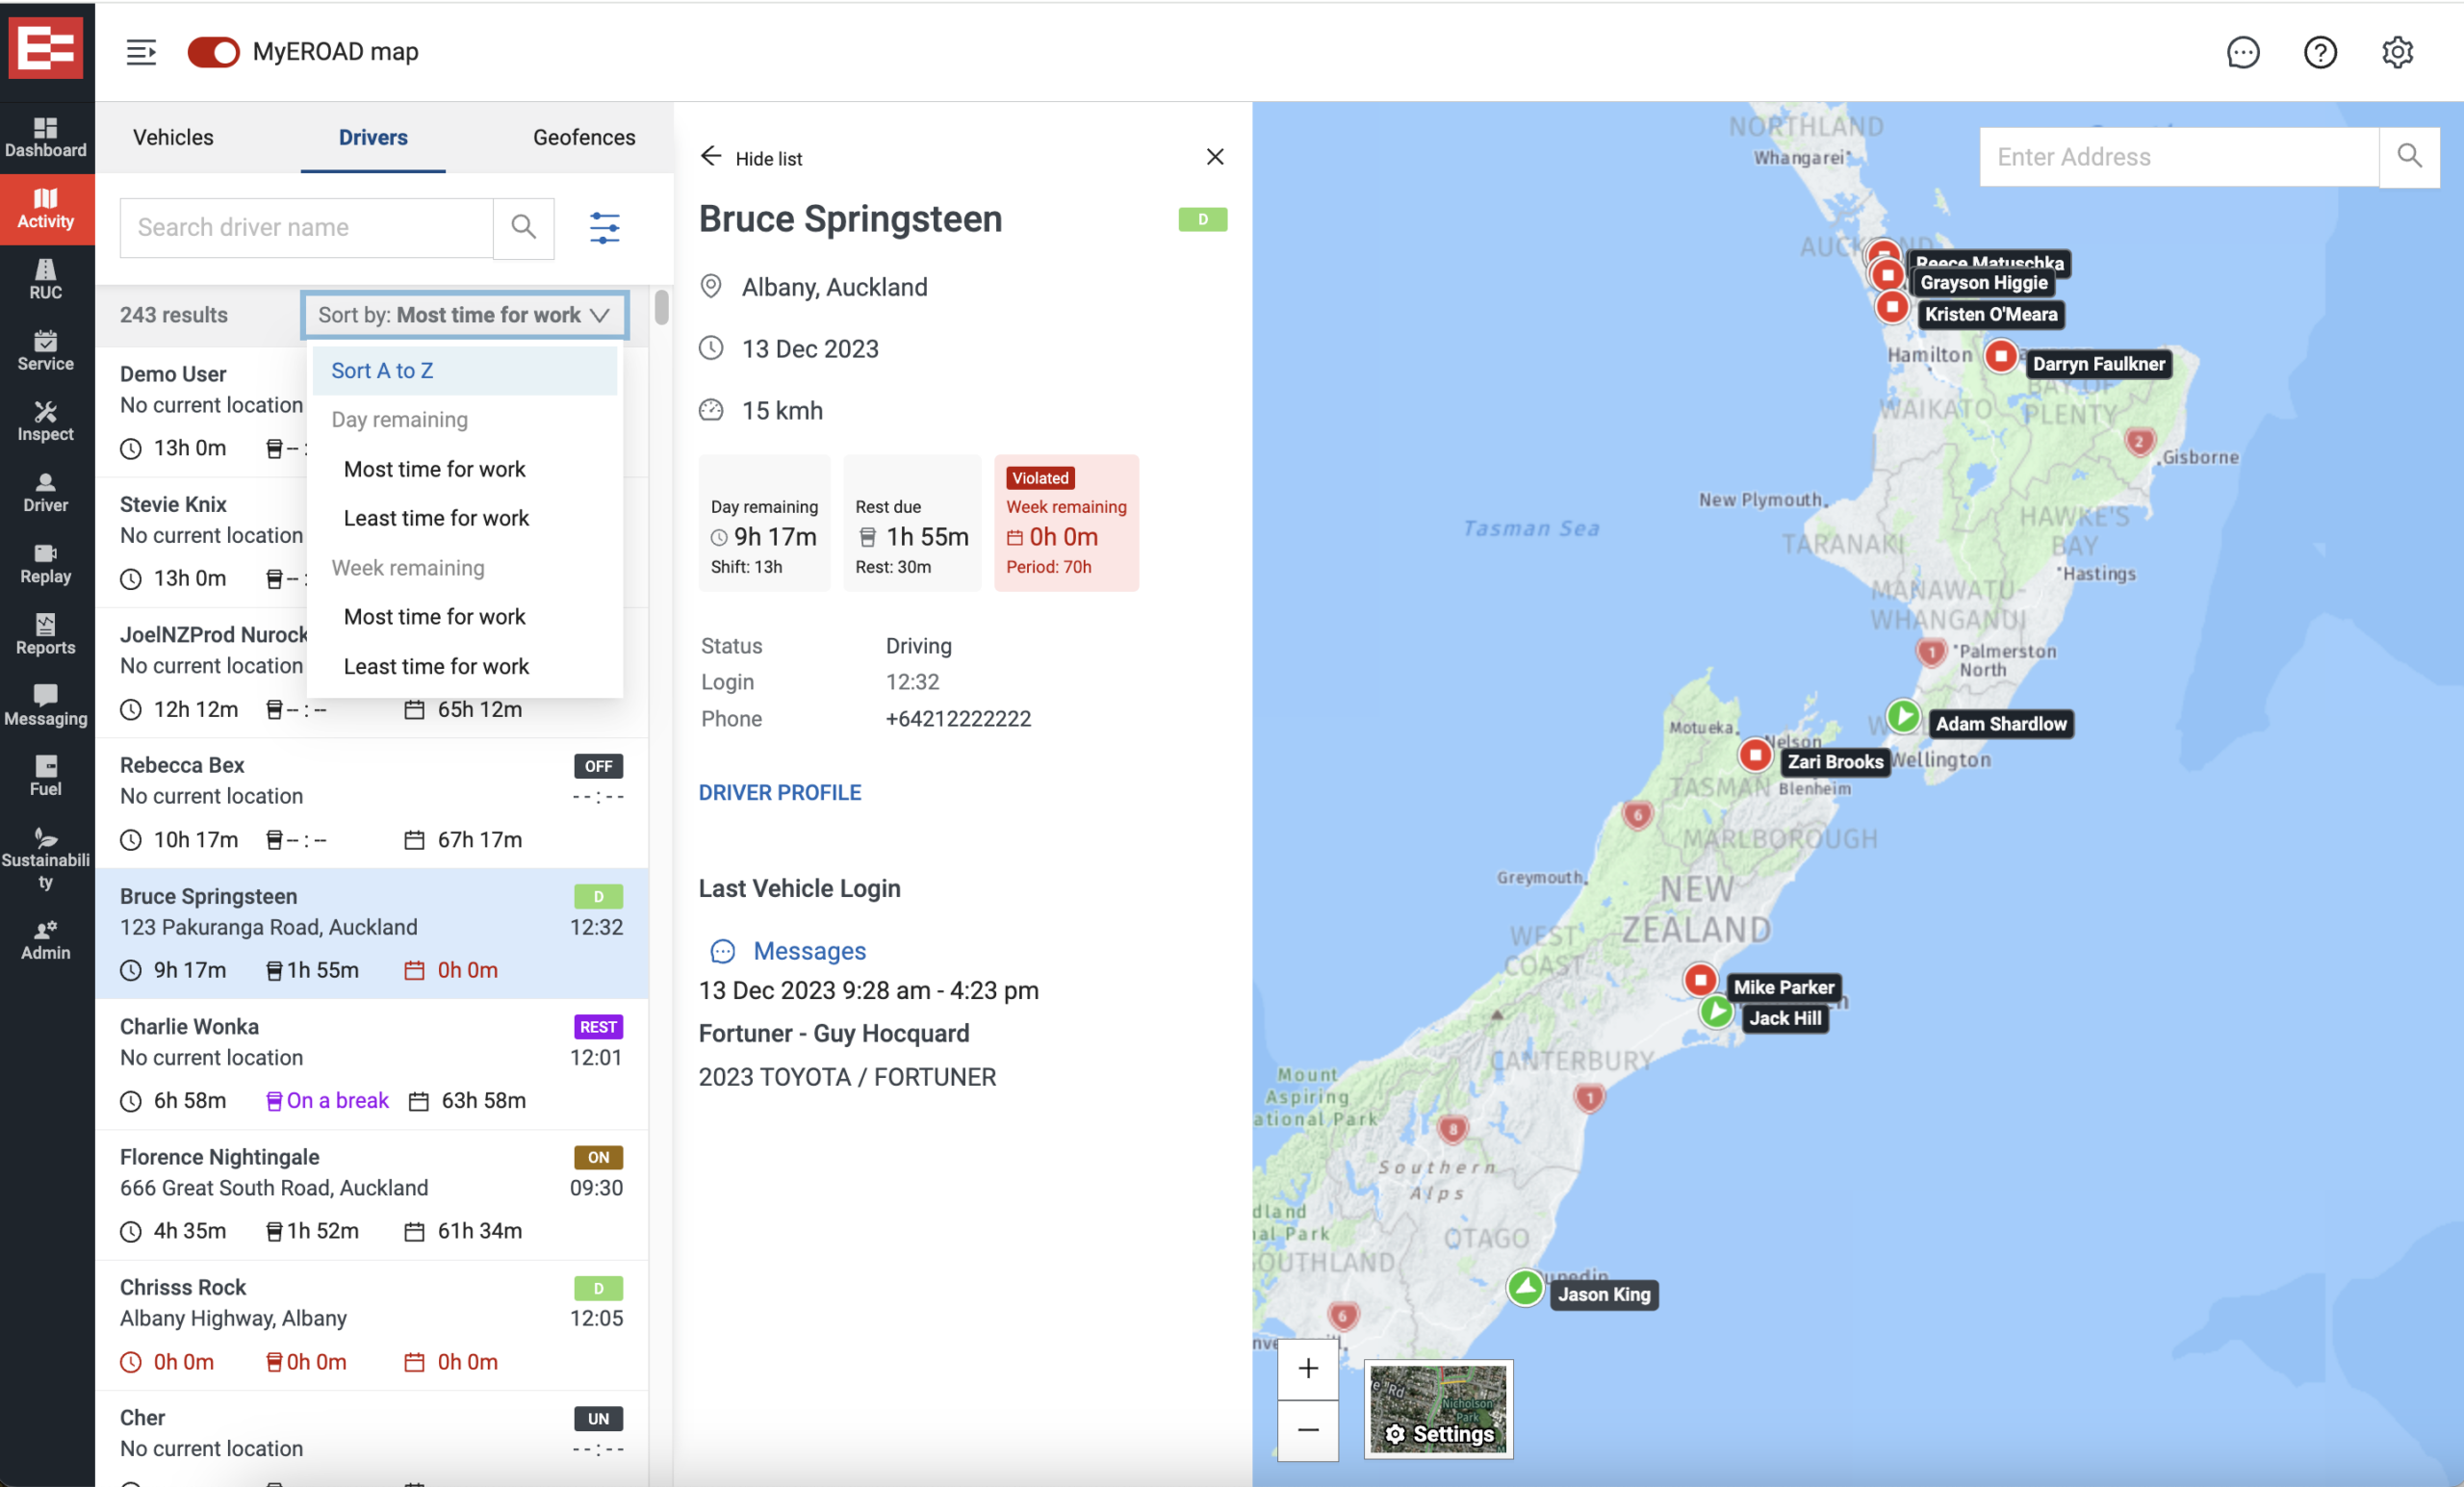 Image shows a screenshot of the MyEROAD Fleet Management platform, with a list of drivers, using the sort-by-hours function